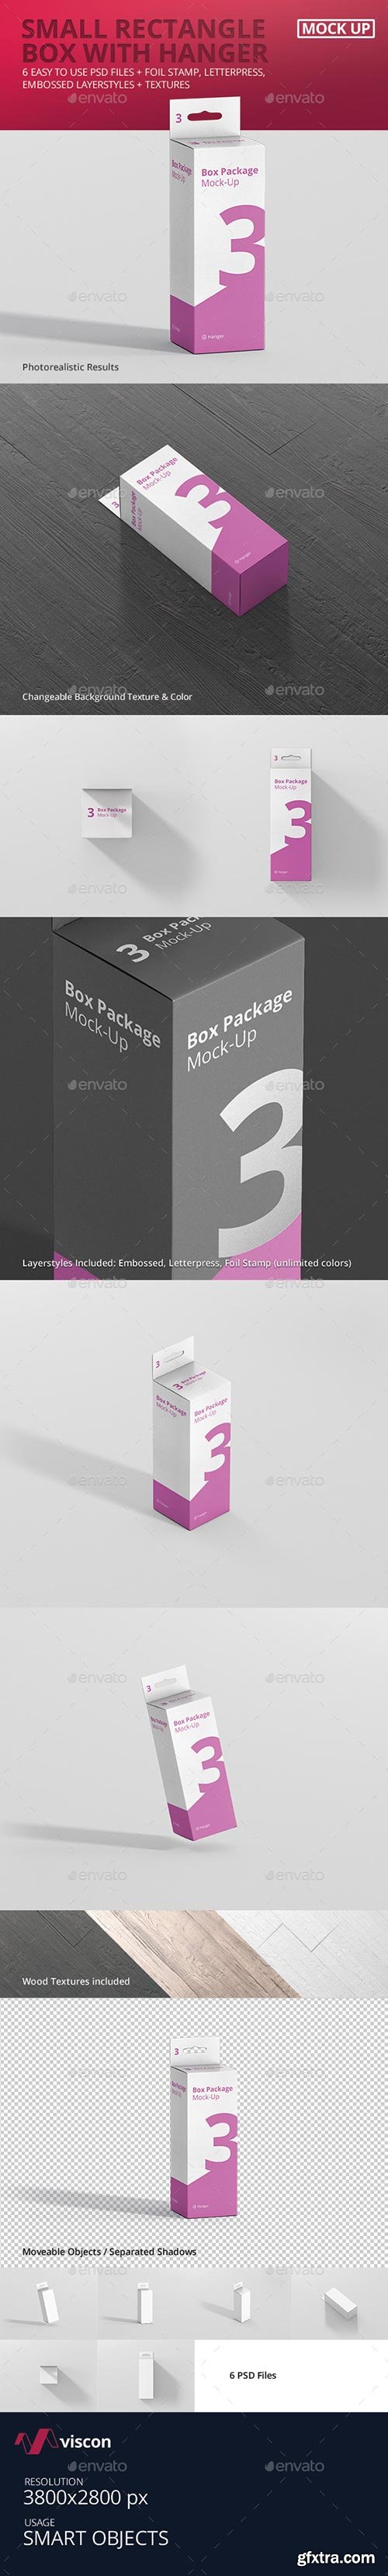 Graphicriver - Package Box Mock-Up - Small Rectangle with Hanger 18000852